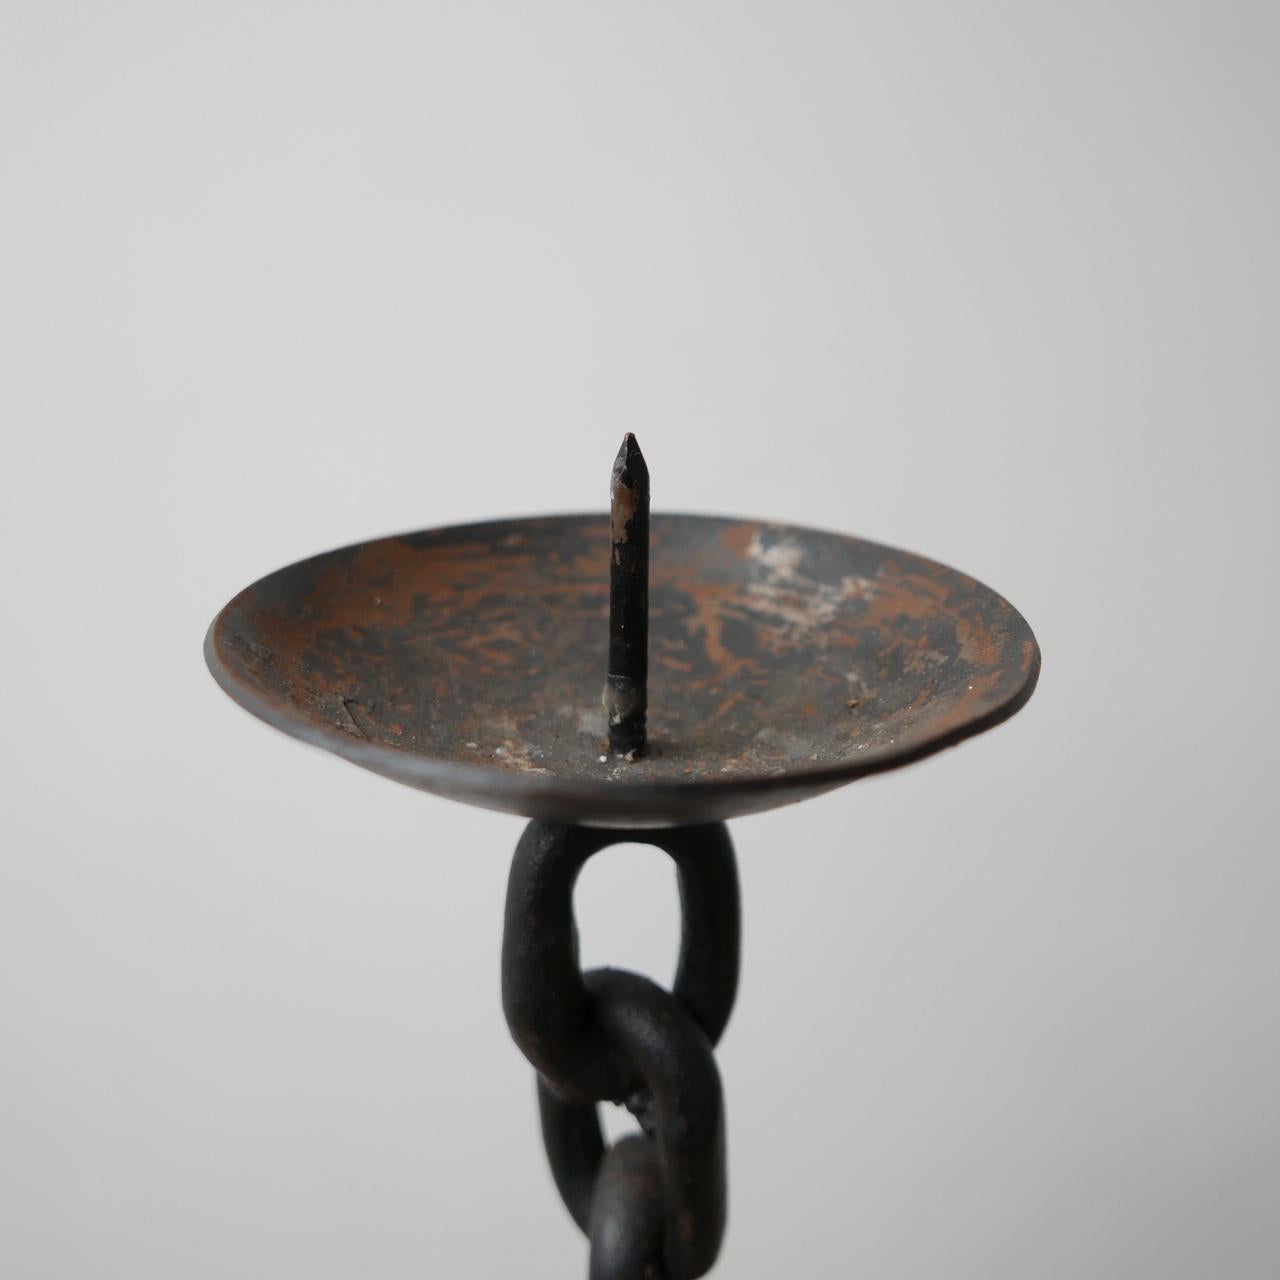 Brutalist Style Midcentury Chain Candlestick In Excellent Condition For Sale In London, GB